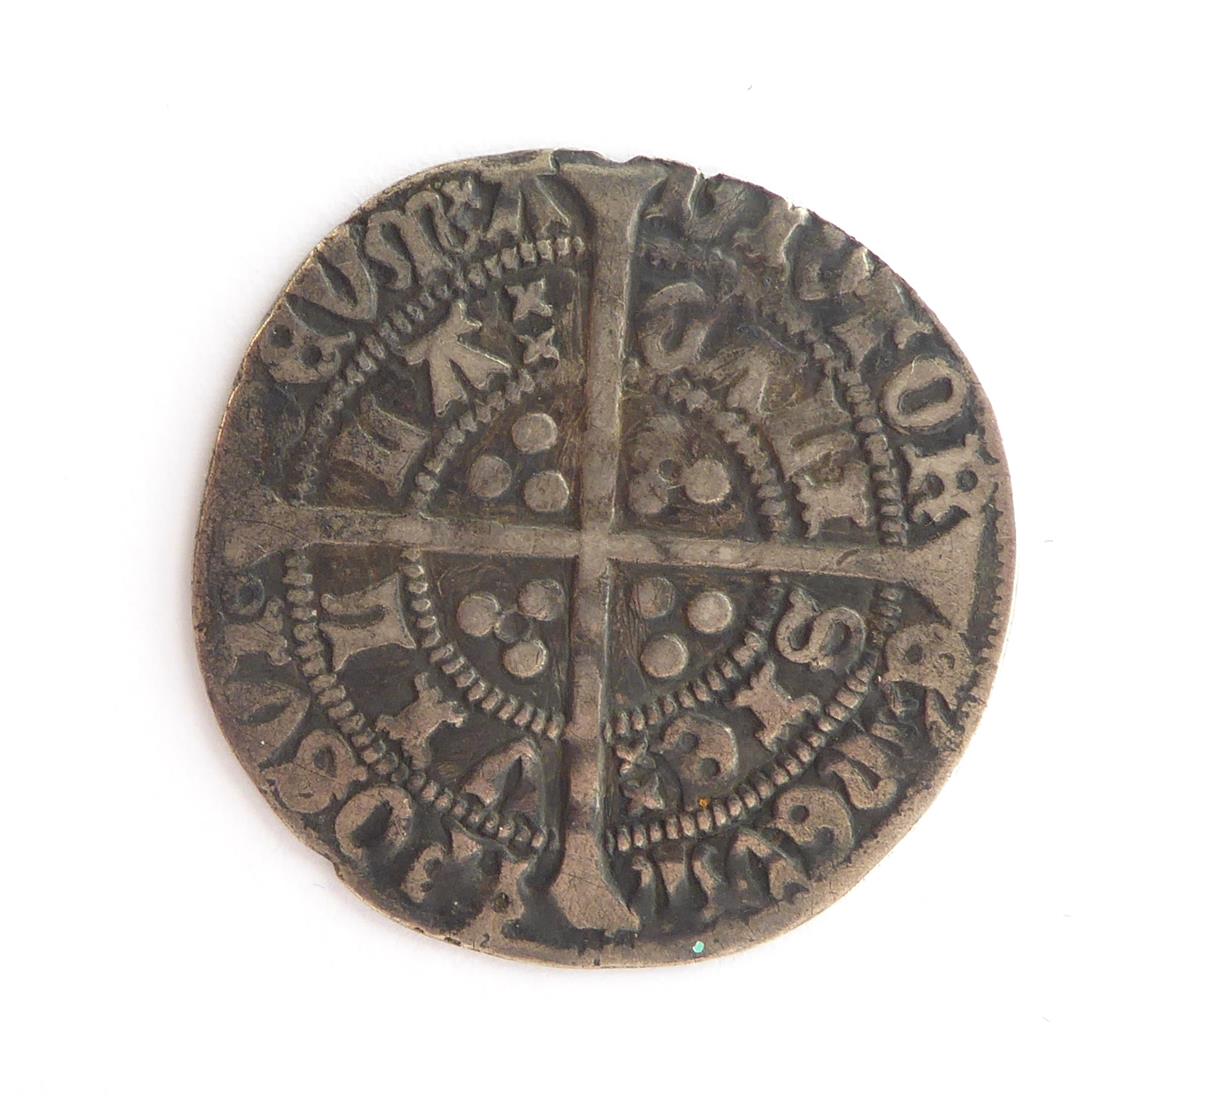 Henry VI Groat, annulet issue, Calais Mint, mm pierced cross, annulets at neck & in two quarters - Image 2 of 2